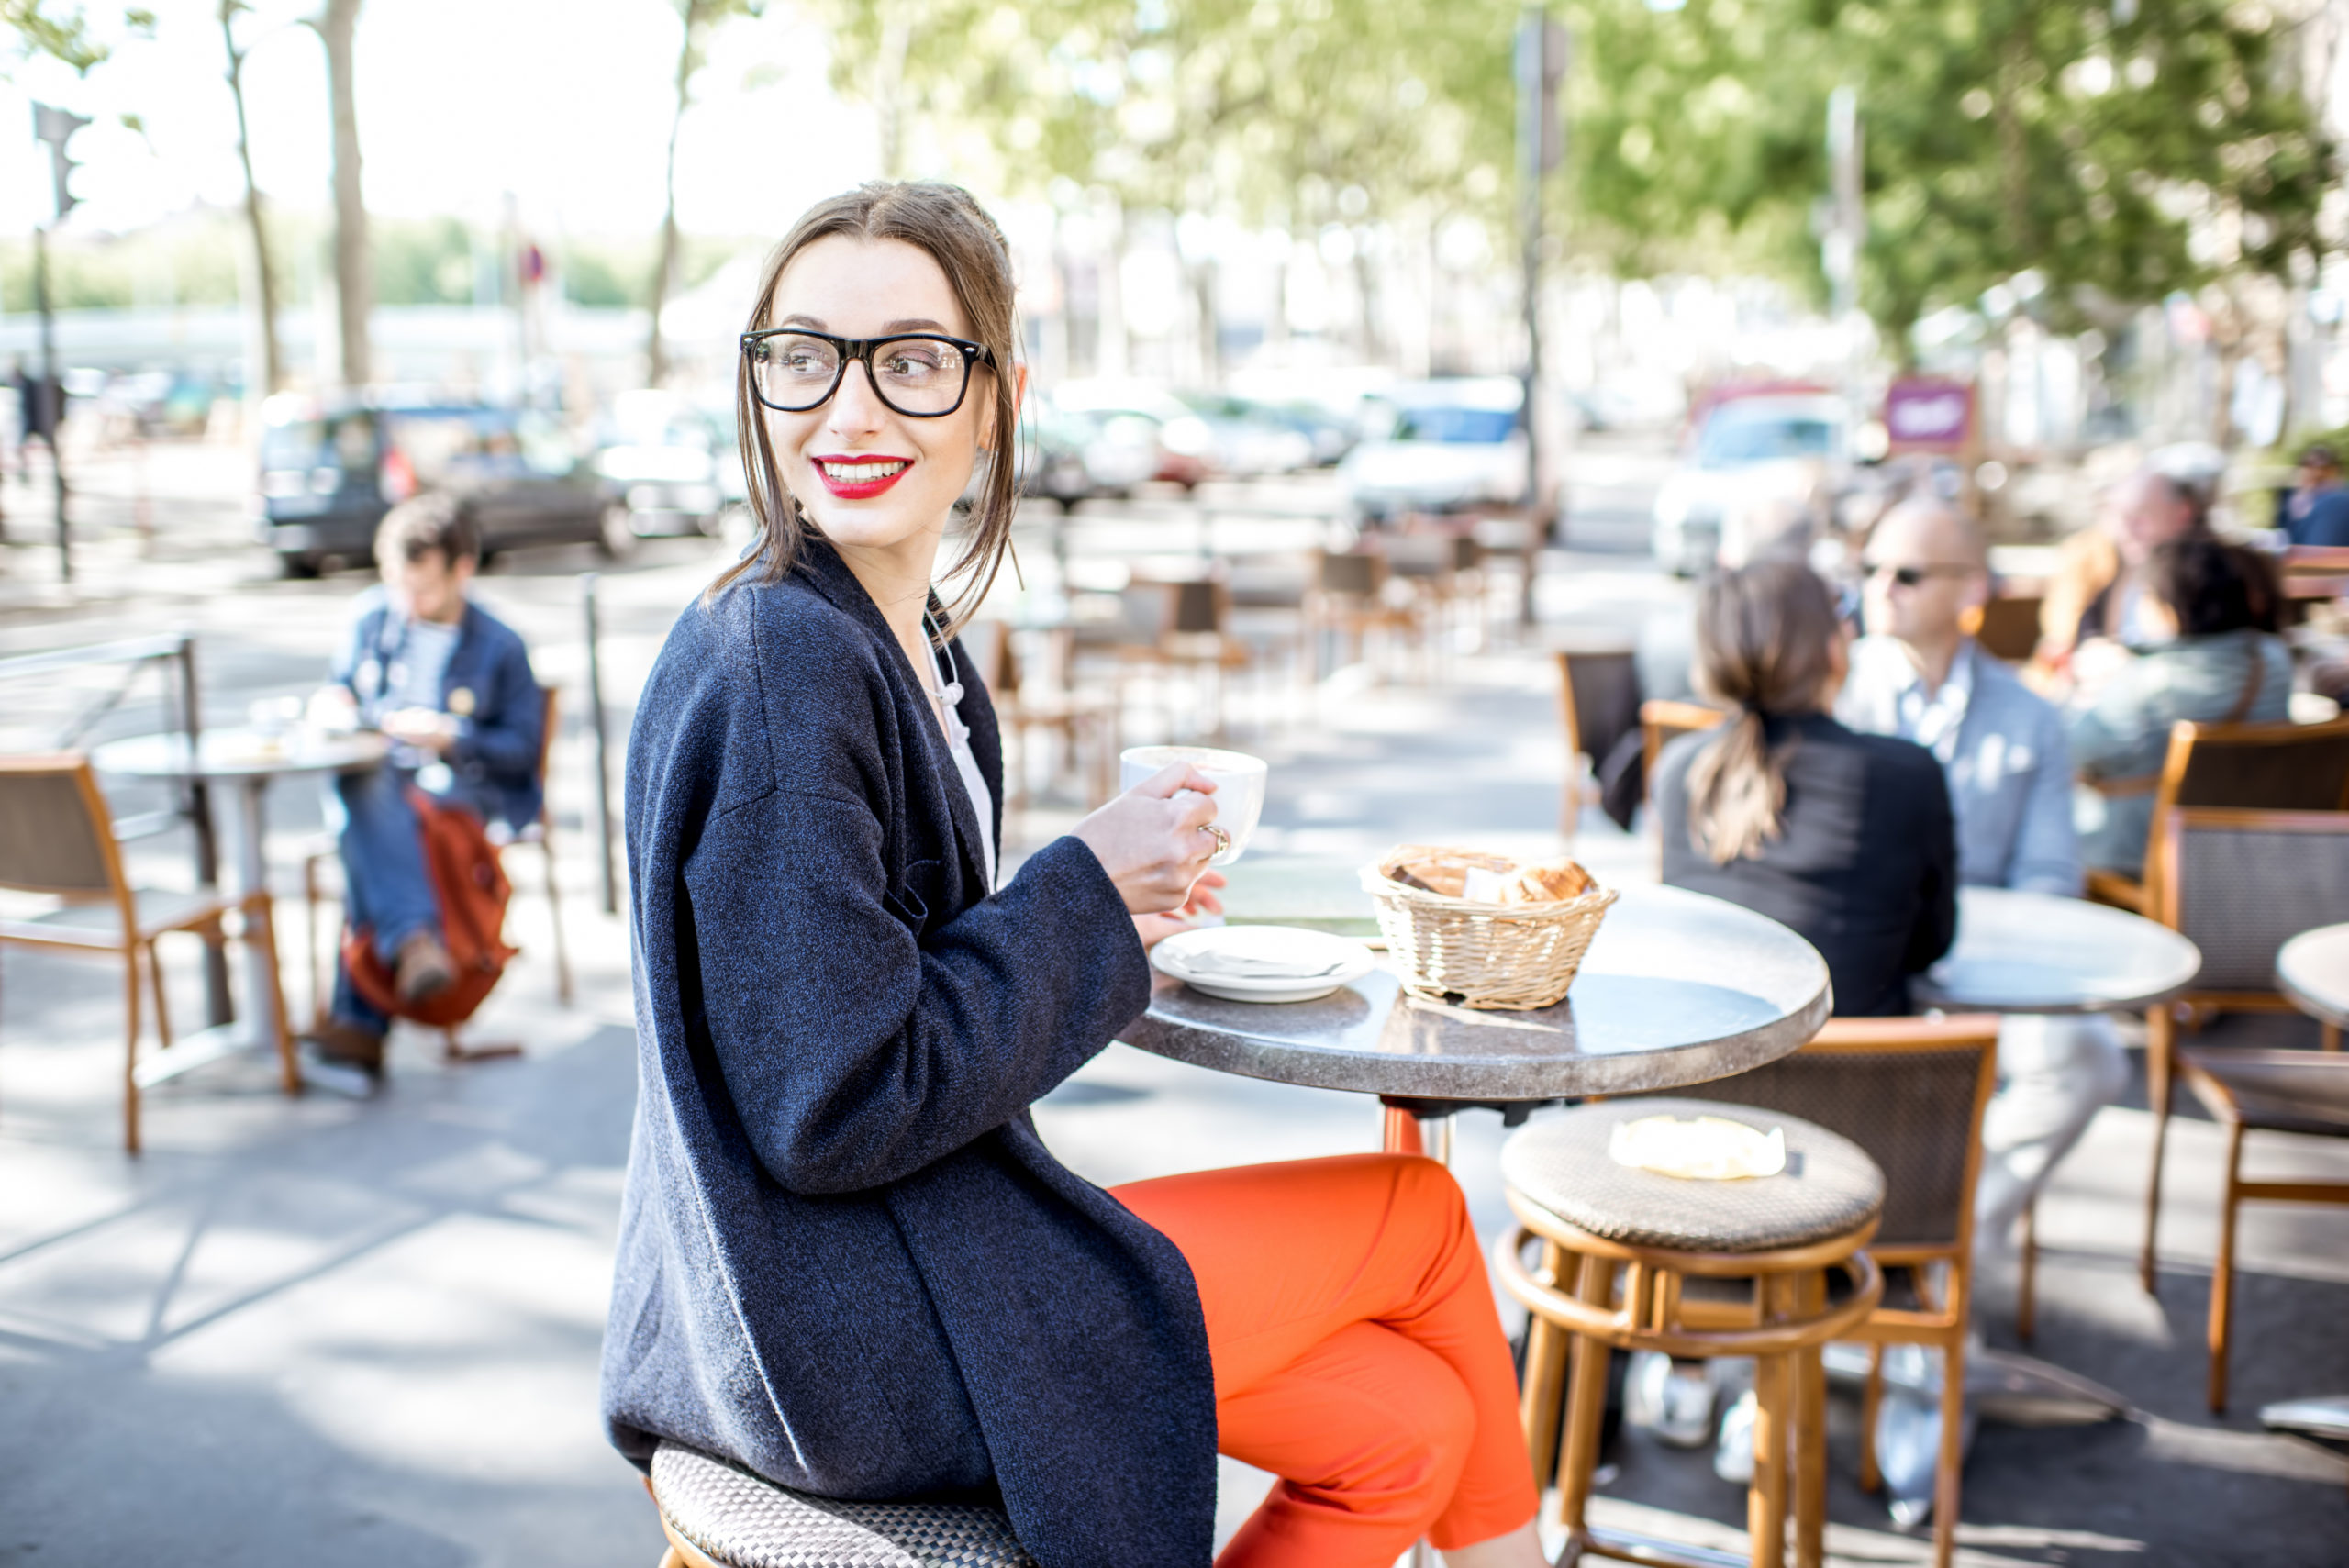 As a teacher, I often hear students talking about their trips to France. They always seem to have so many questions about tipping etiquette in the country. In this blog post, I'll outline ten things that everyone should know before they travel to France and tip someone there. Keep reading for all the details!